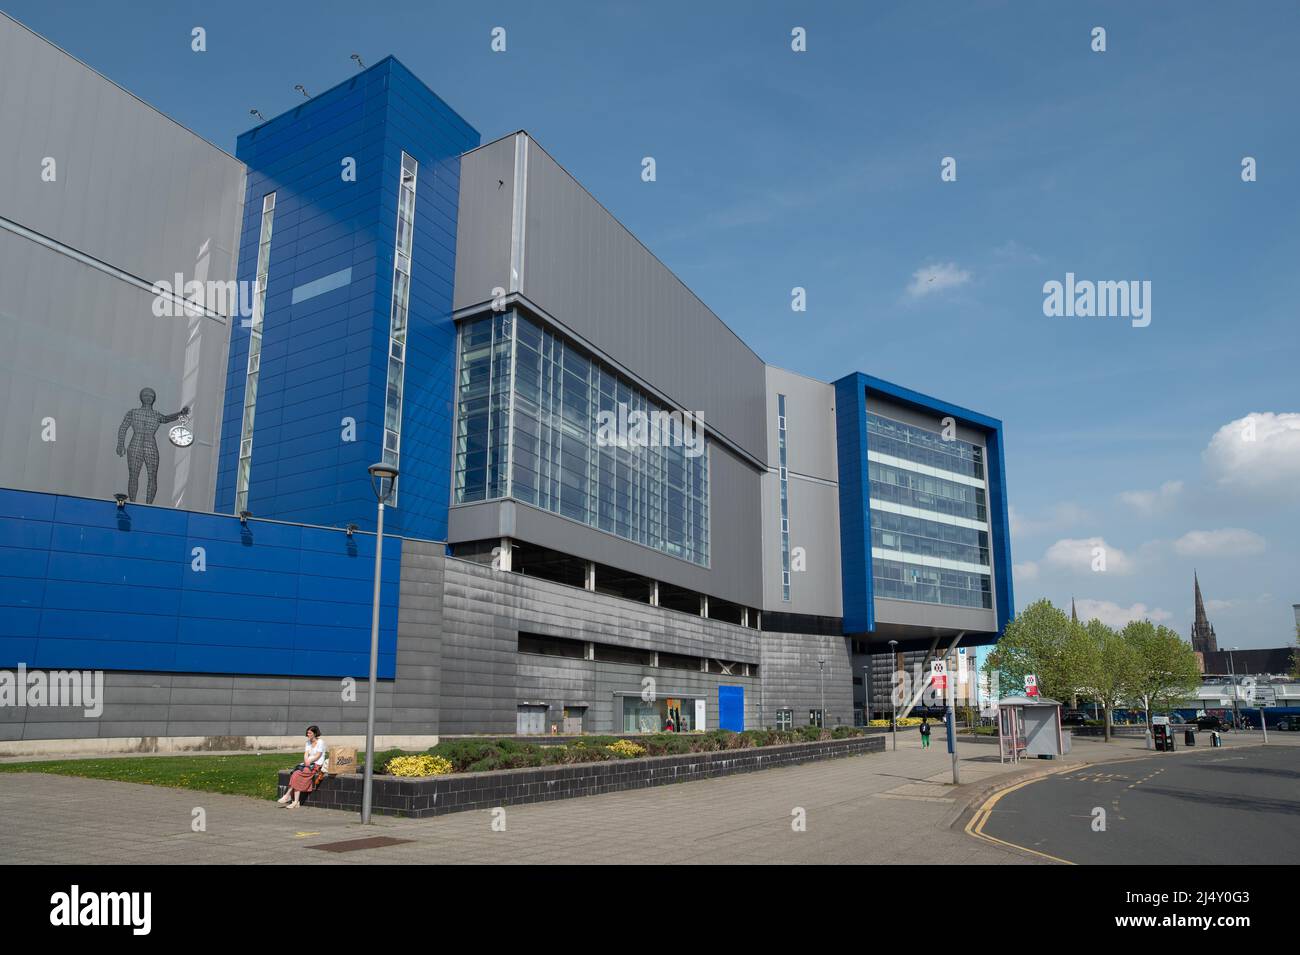 Former Ikea building in Coventry, UK. Now repurposed to house collections from the Arts Council England, and also a base for City of Culture 2021. Stock Photo